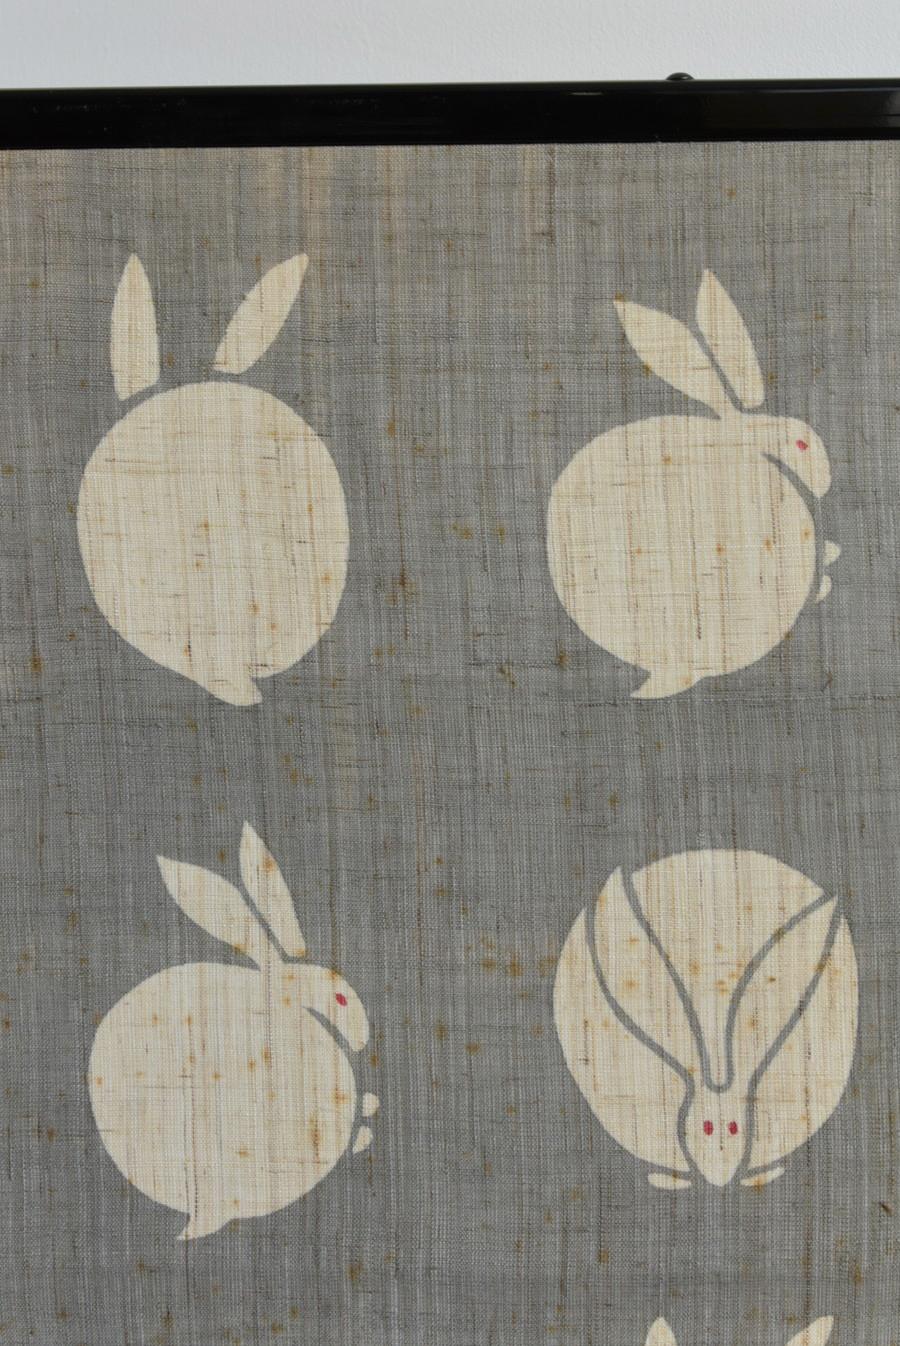 20th Century Japanese Folding Screen with Moon and Rabbit Drawn on Cloth/Old Partition/20th